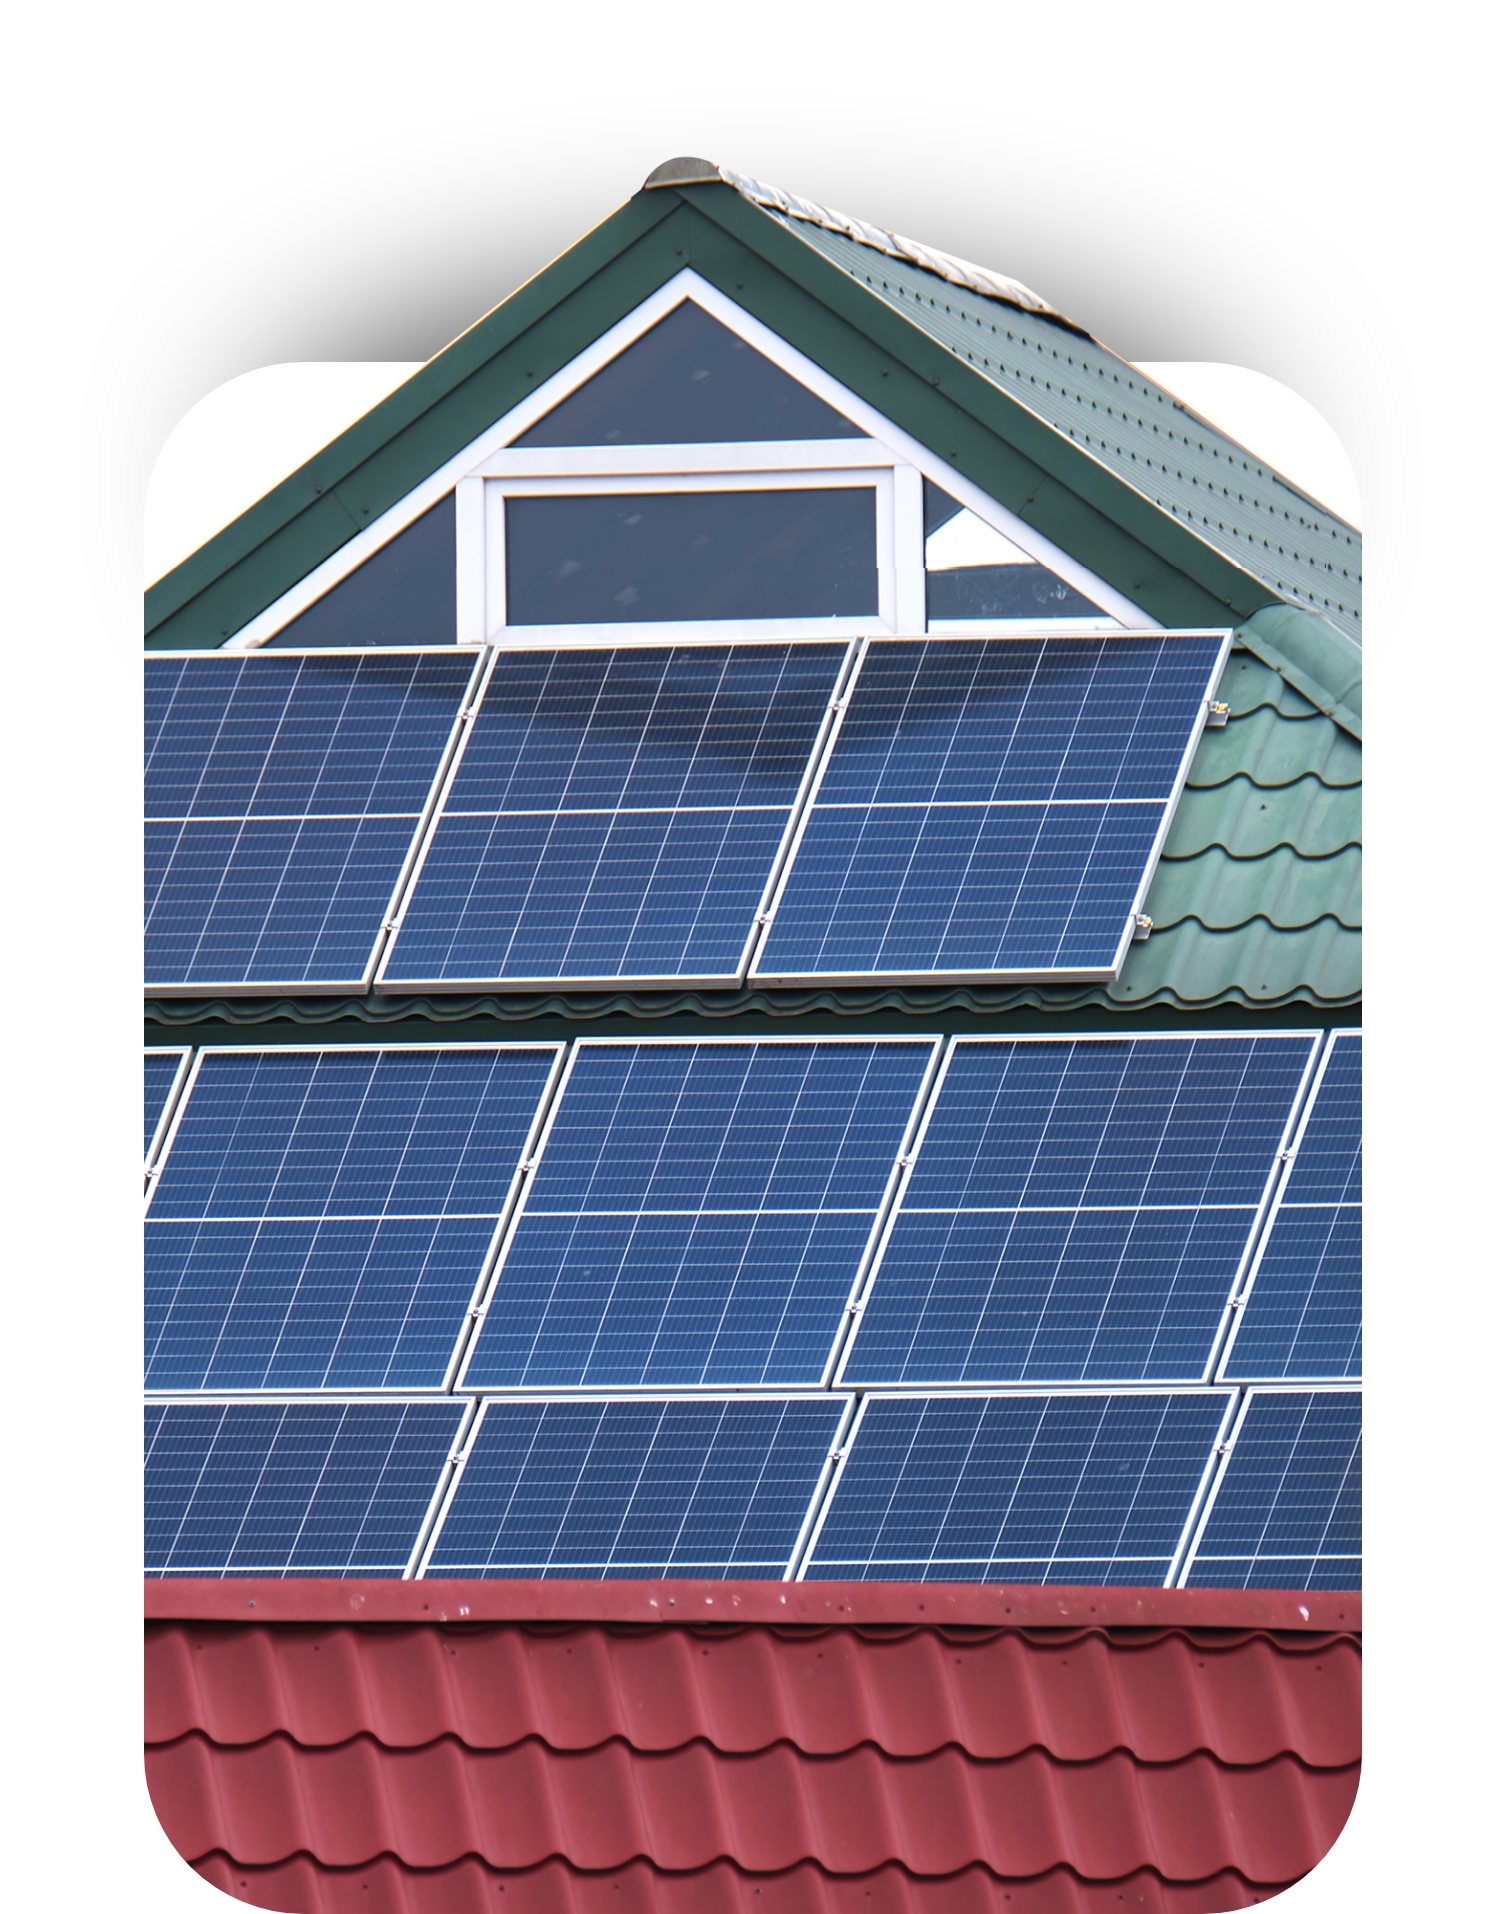 As one of the best solar panel companies in Colorado Springs, CO, our solar installation team will bring your family energy freedom. Solar power is the way of the future.